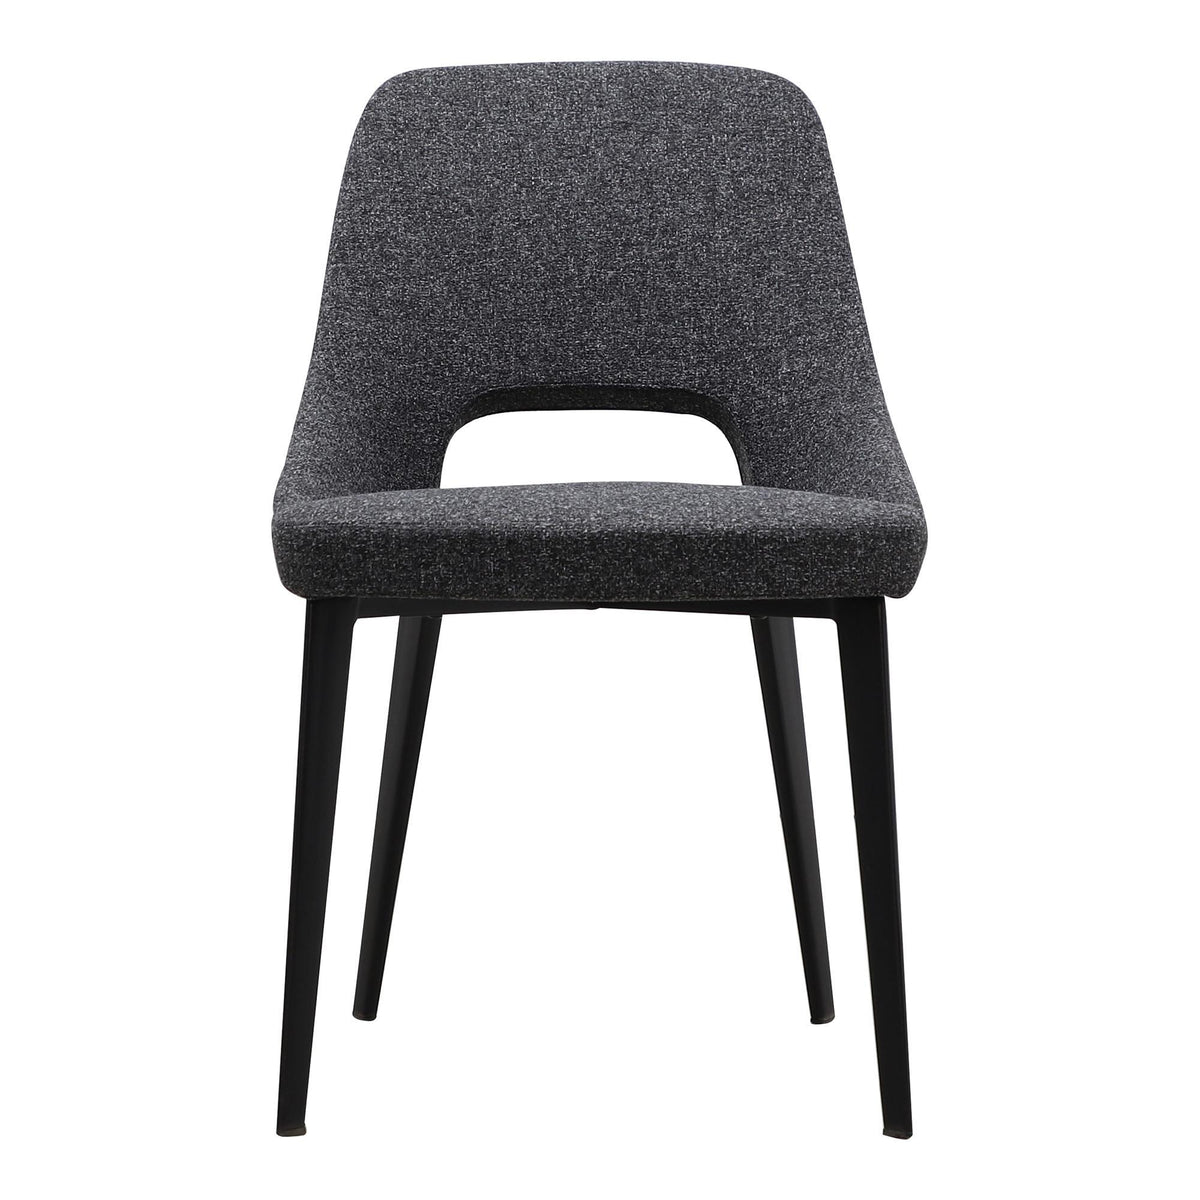 Moe's Home Collection Tizz Dining Chair Dark Grey - EJ-1041-25